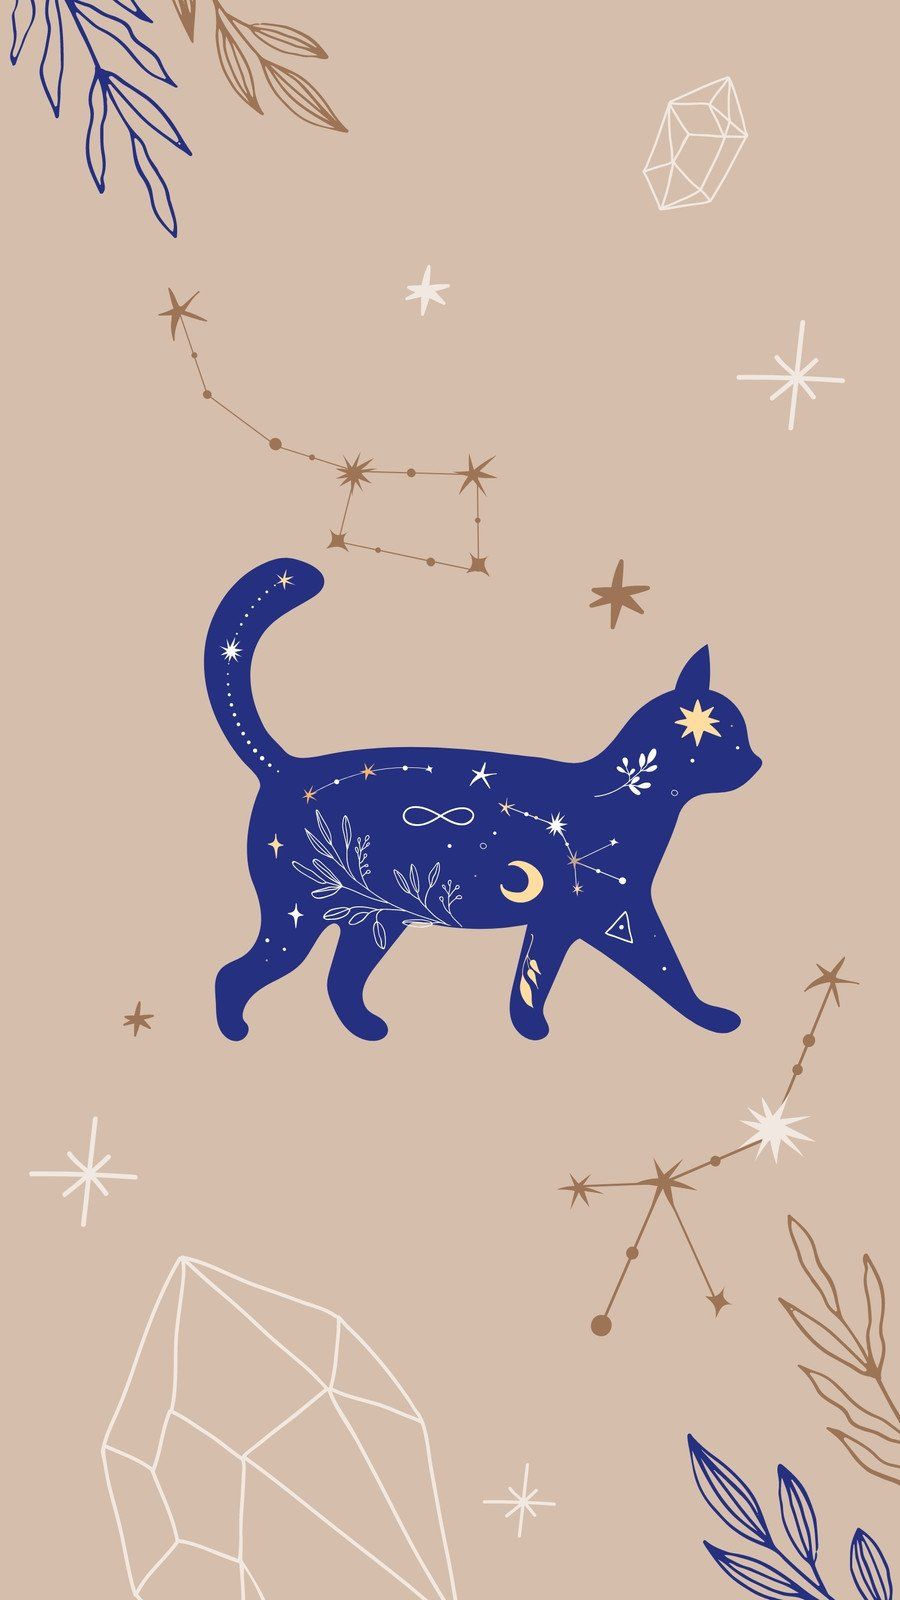 A cat with stars and crystals on it - Artemis